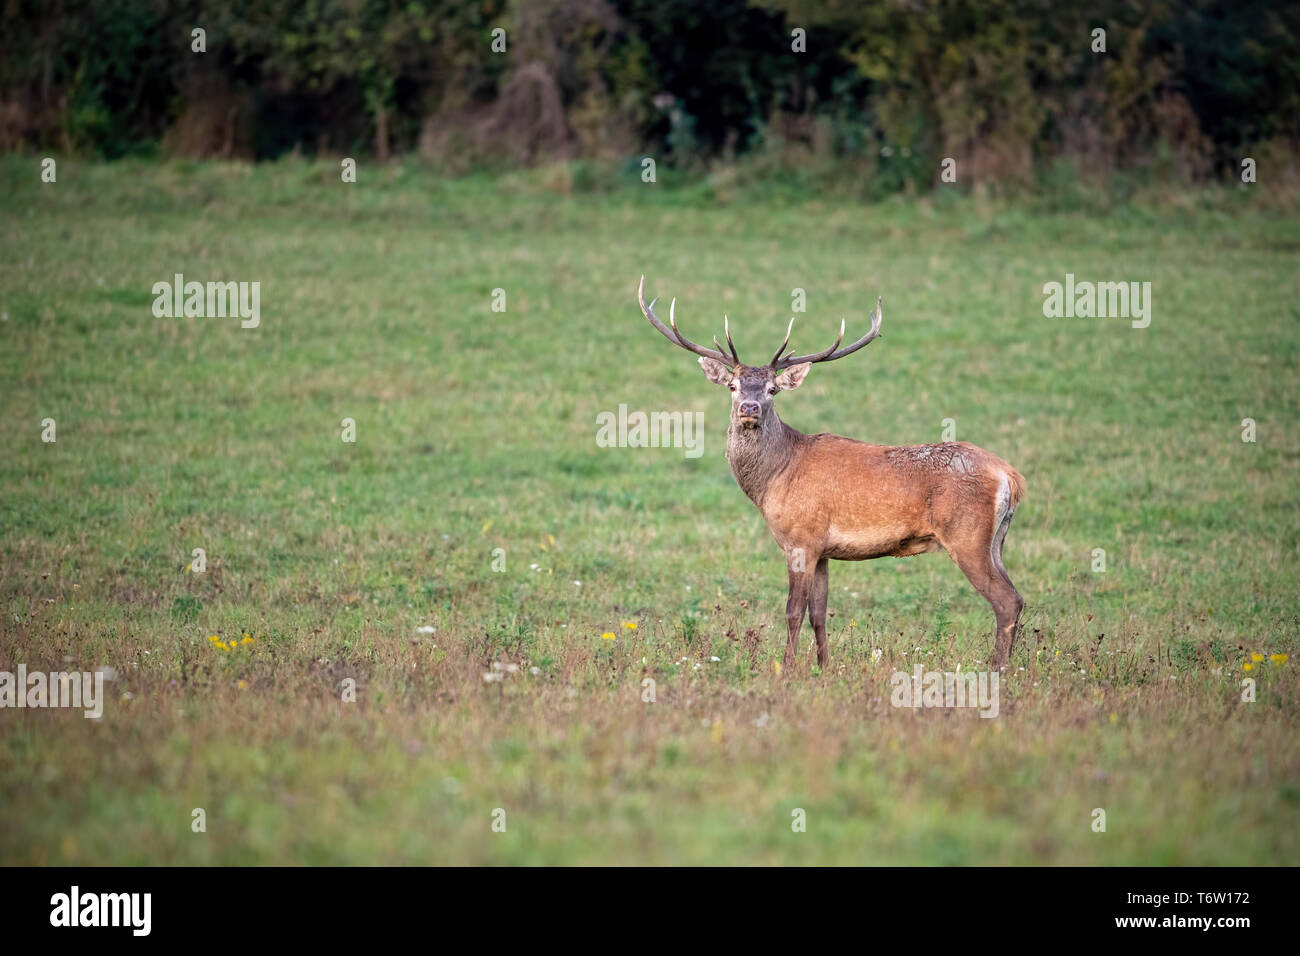 Red deer stag looking to camera on a green meadow Stock Photo